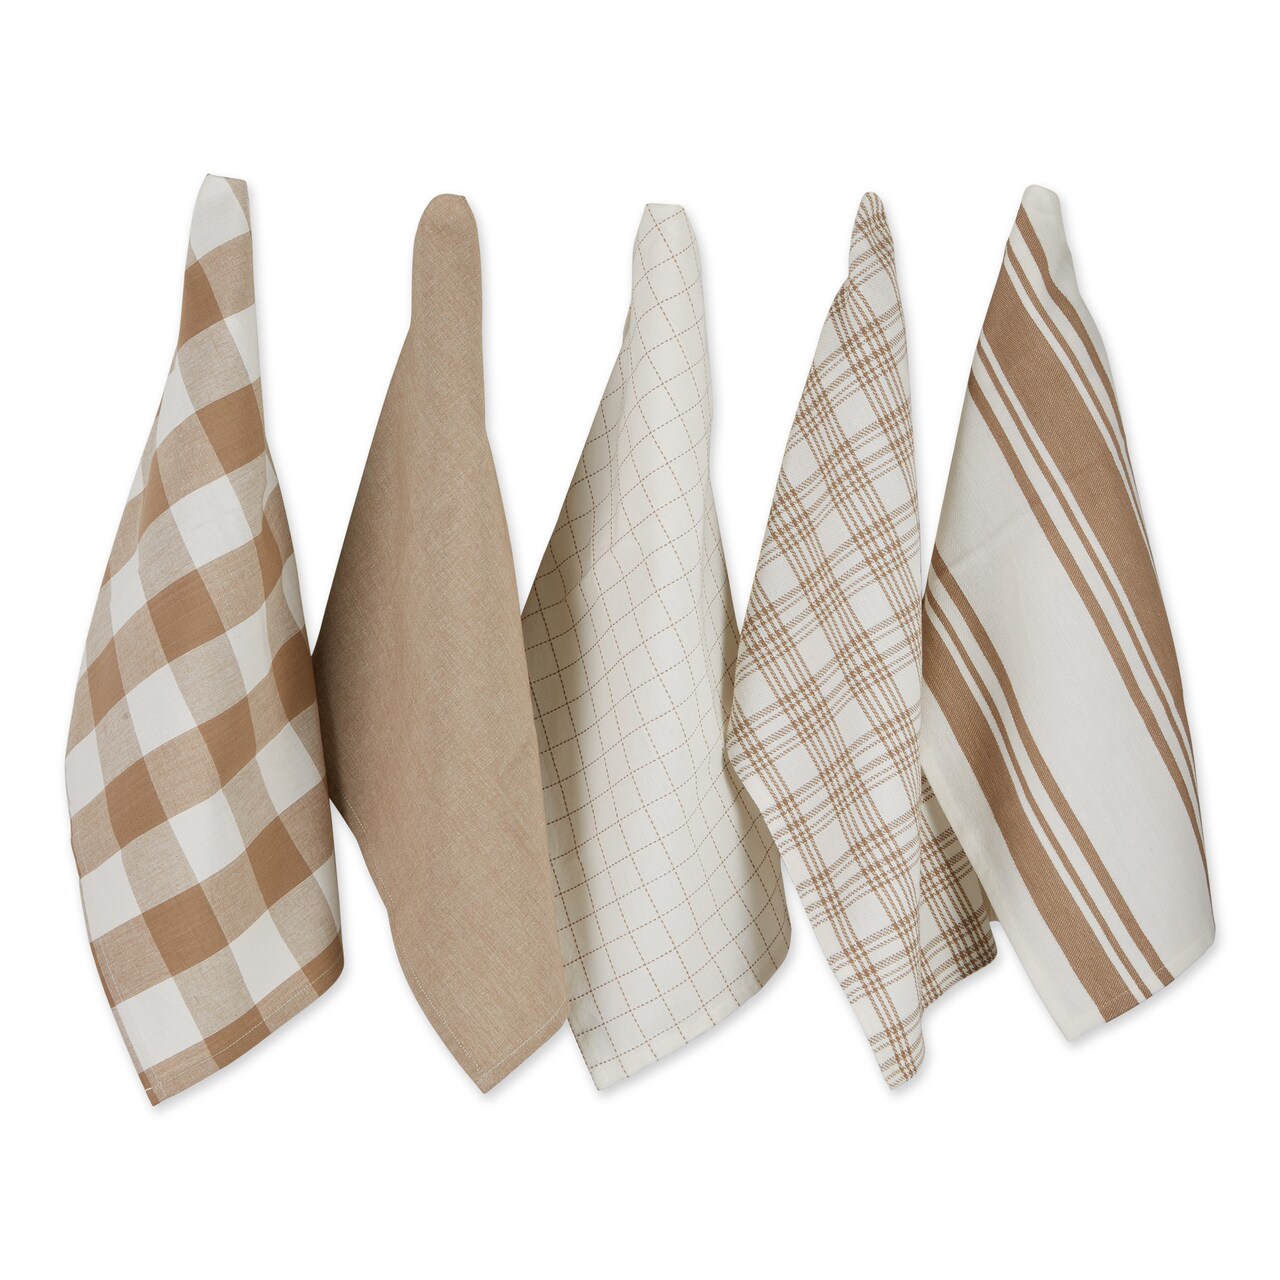 Contemporary Home Living Set of 5 Assorted Stone Brown and White Everyday Dish  Towel, 28